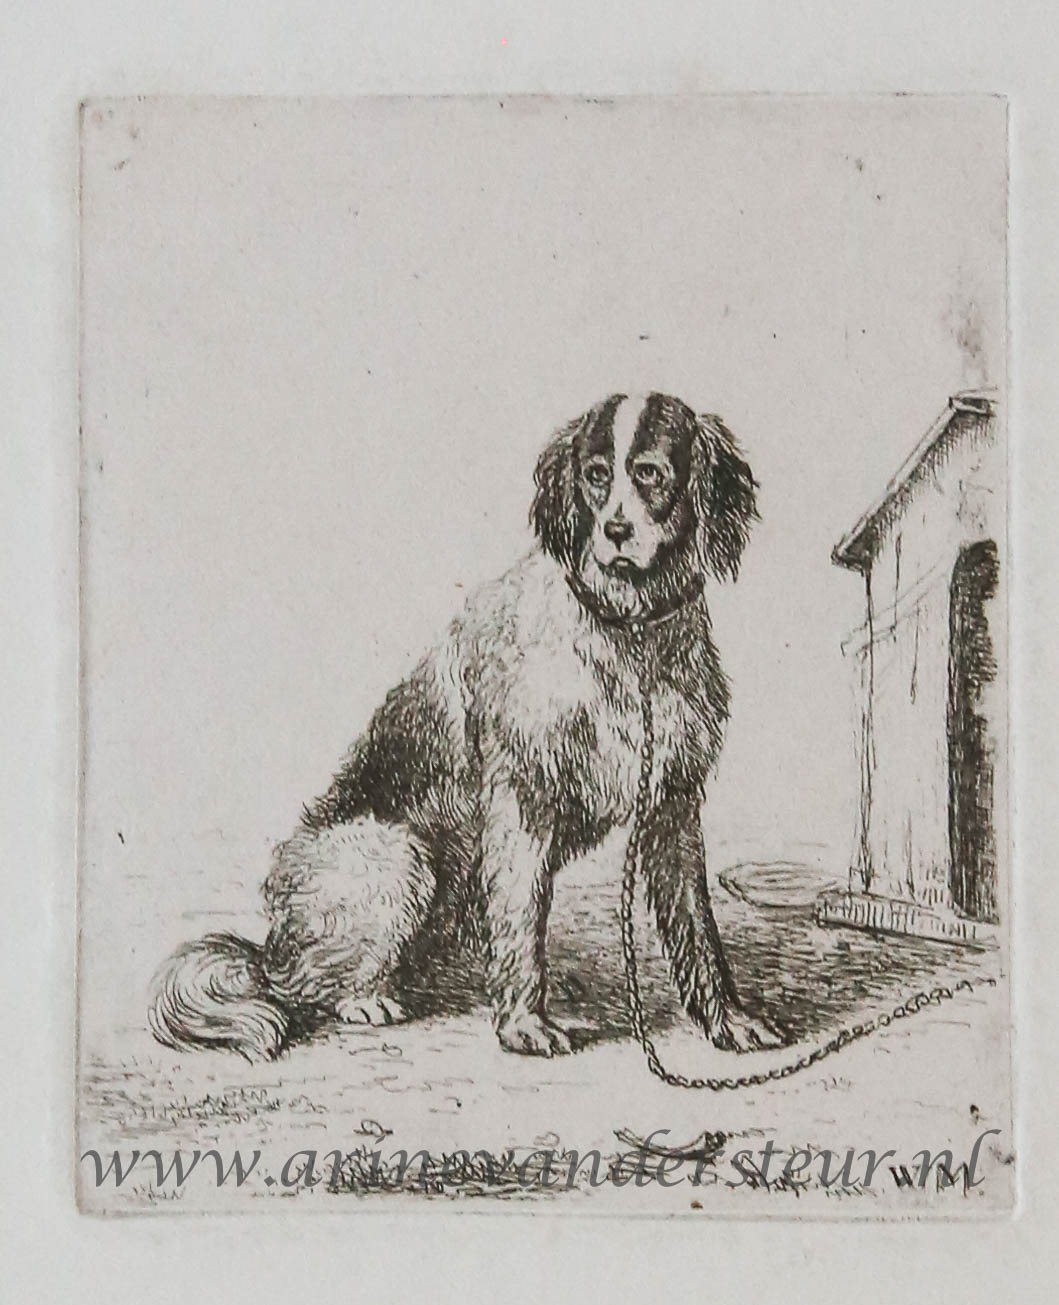 [Antique print, etching] A chained dog / Hond aan de ketting.